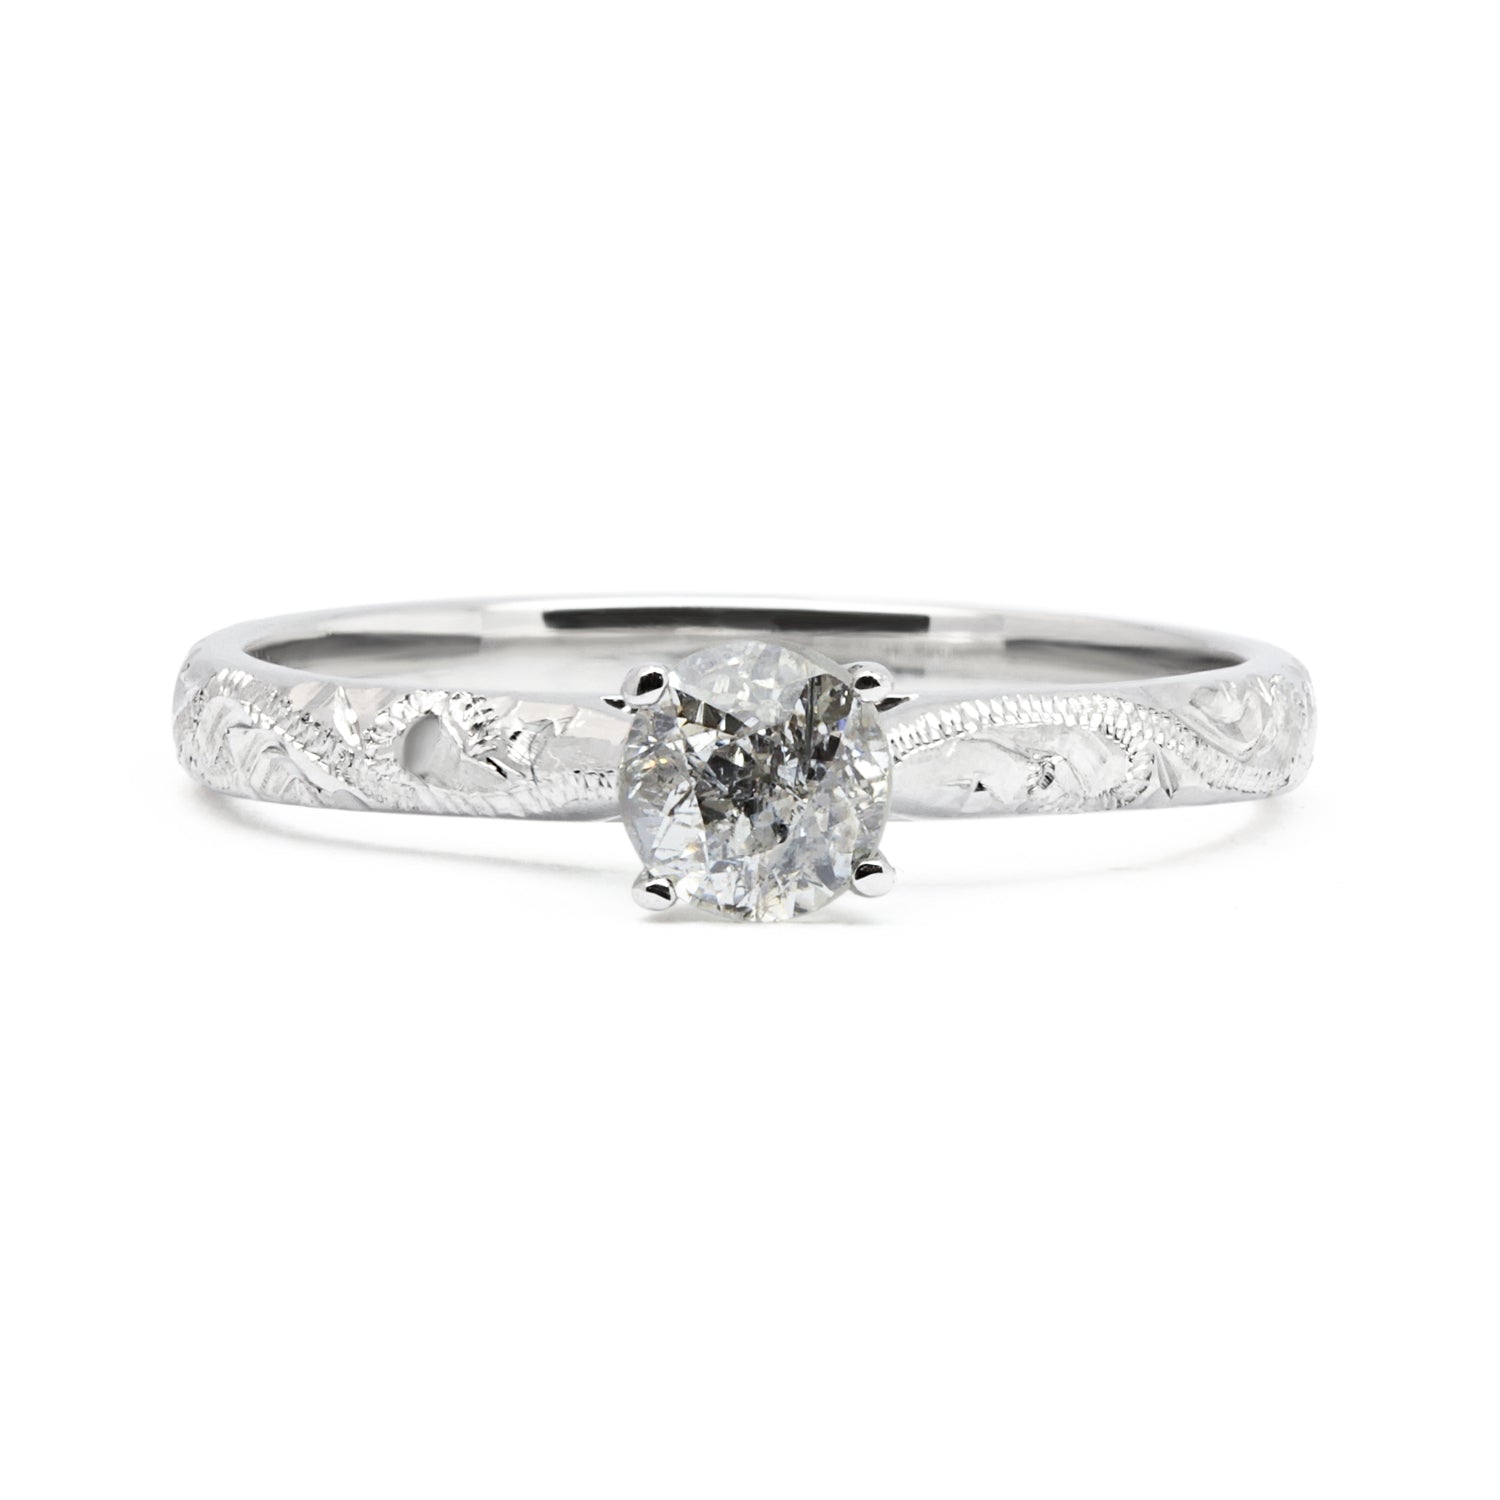 Lebrusan Studio Athena engagement ring with salt and pepper diamond and recycled white gold